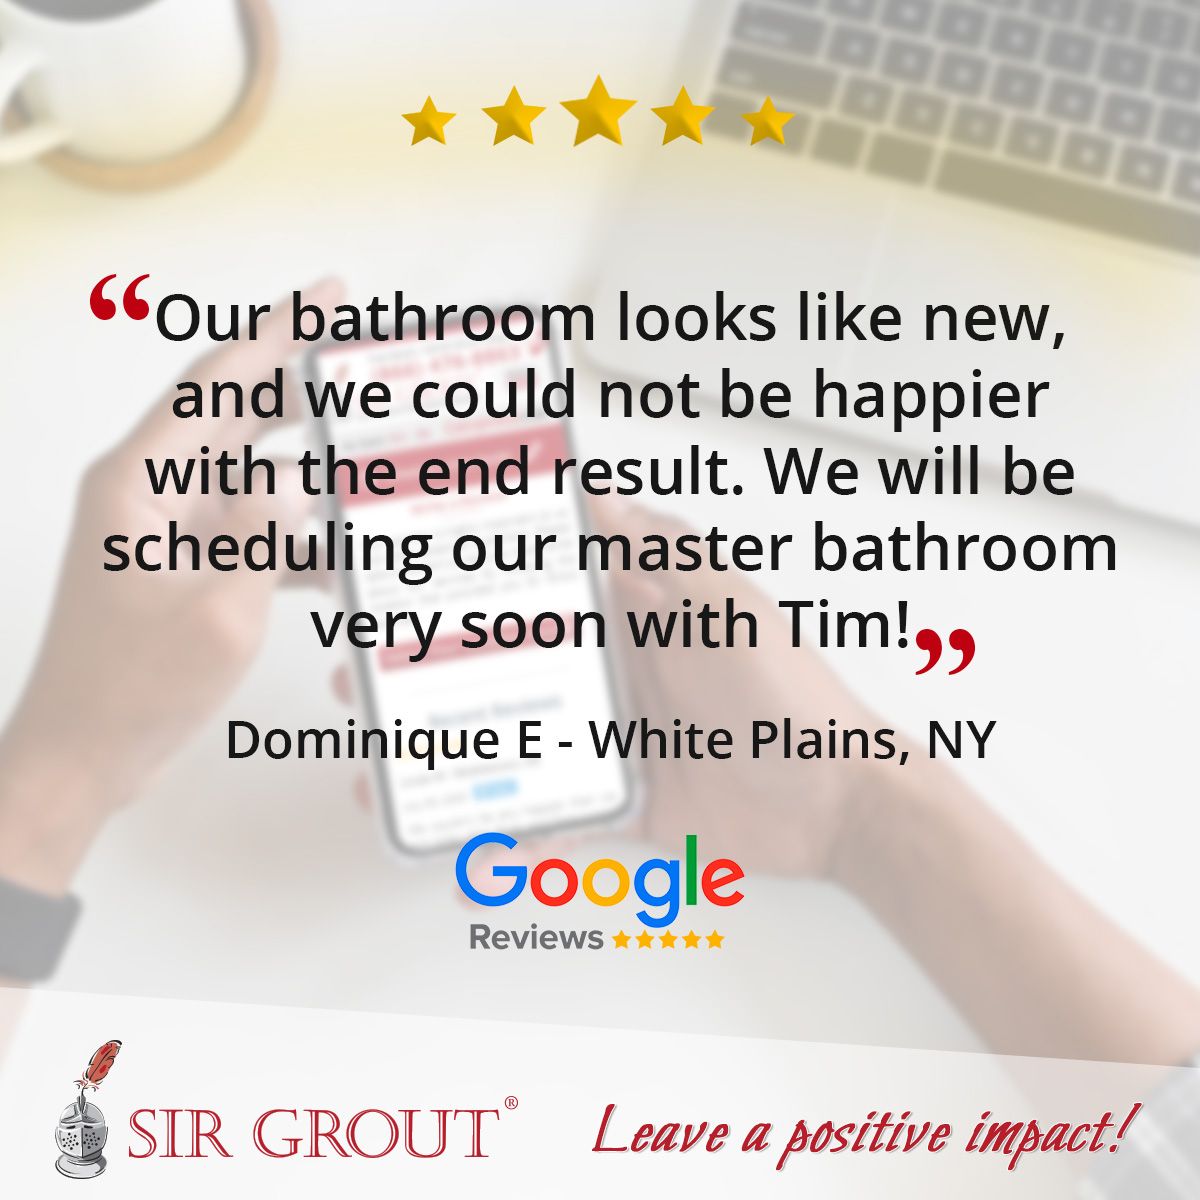 Our bathroom looks like new, and we could not be happier with the end result. We will be scheduling our master bathroom very soon with Tim!